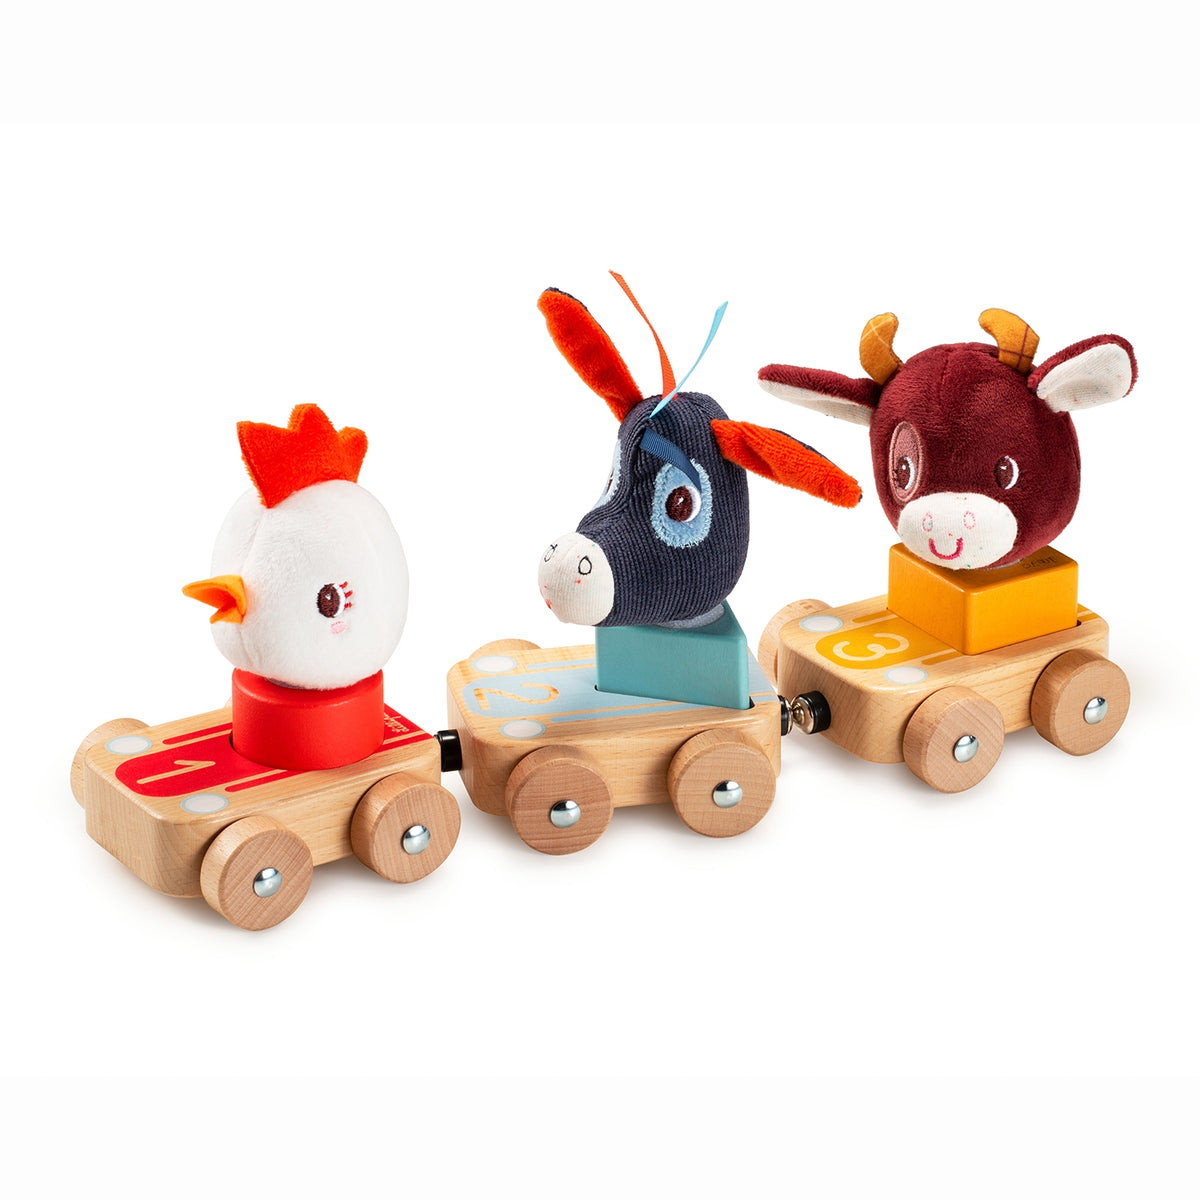 Farm: Chain of Cars by Lilliputiens